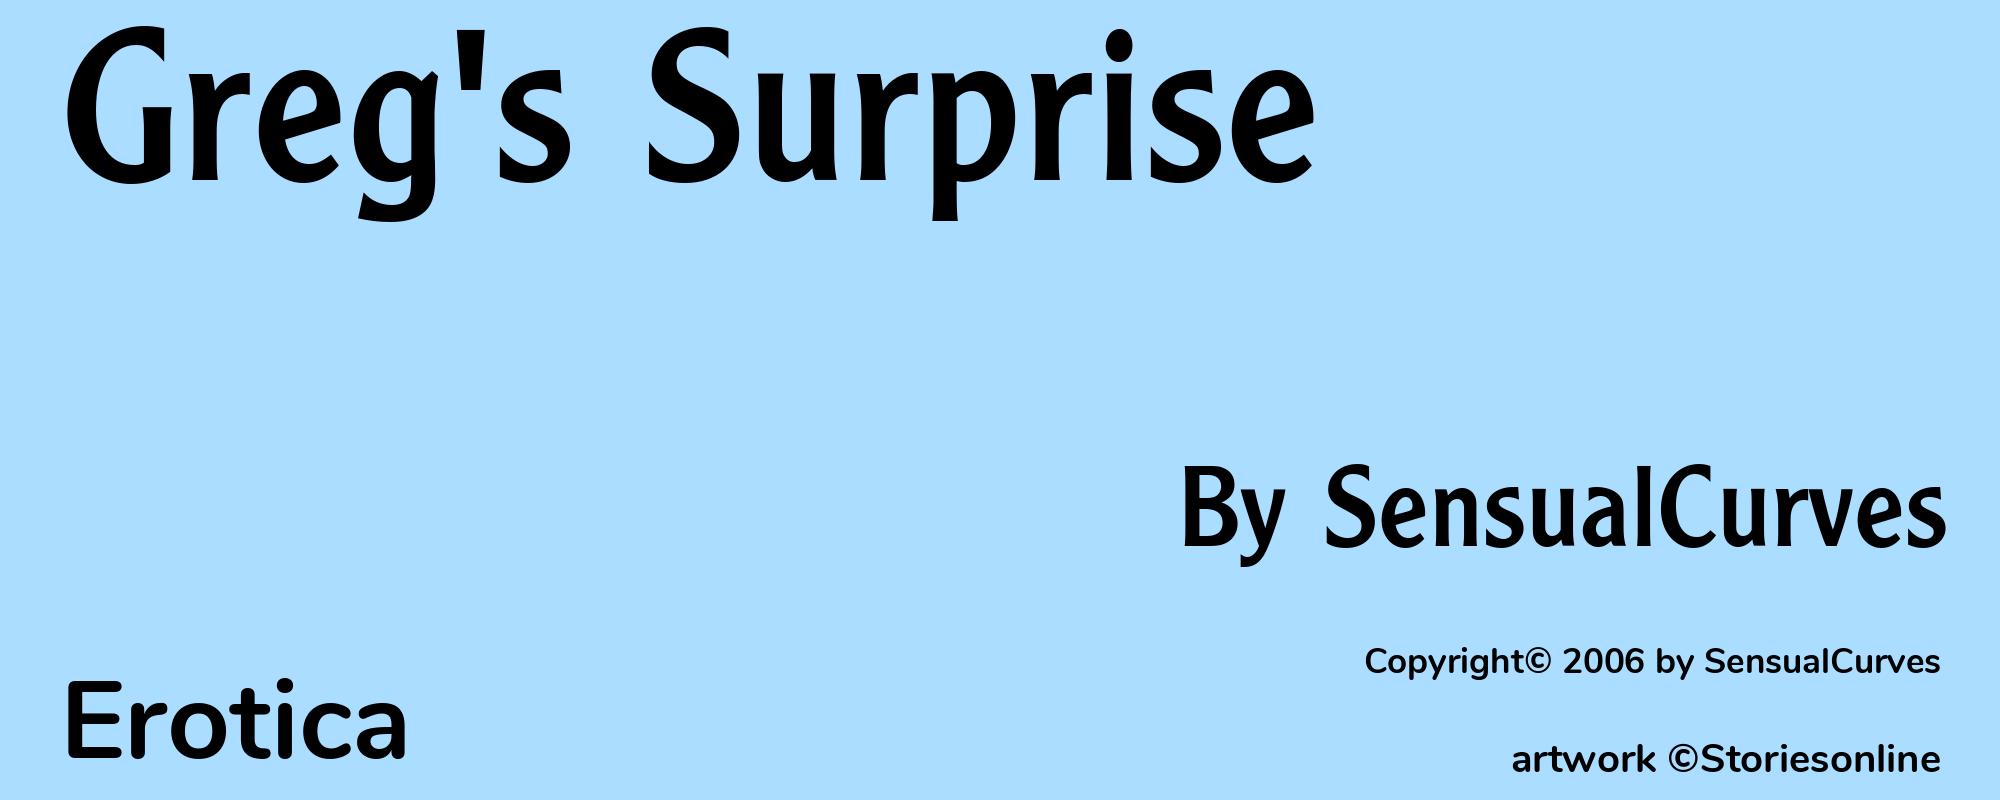 Greg's Surprise - Cover